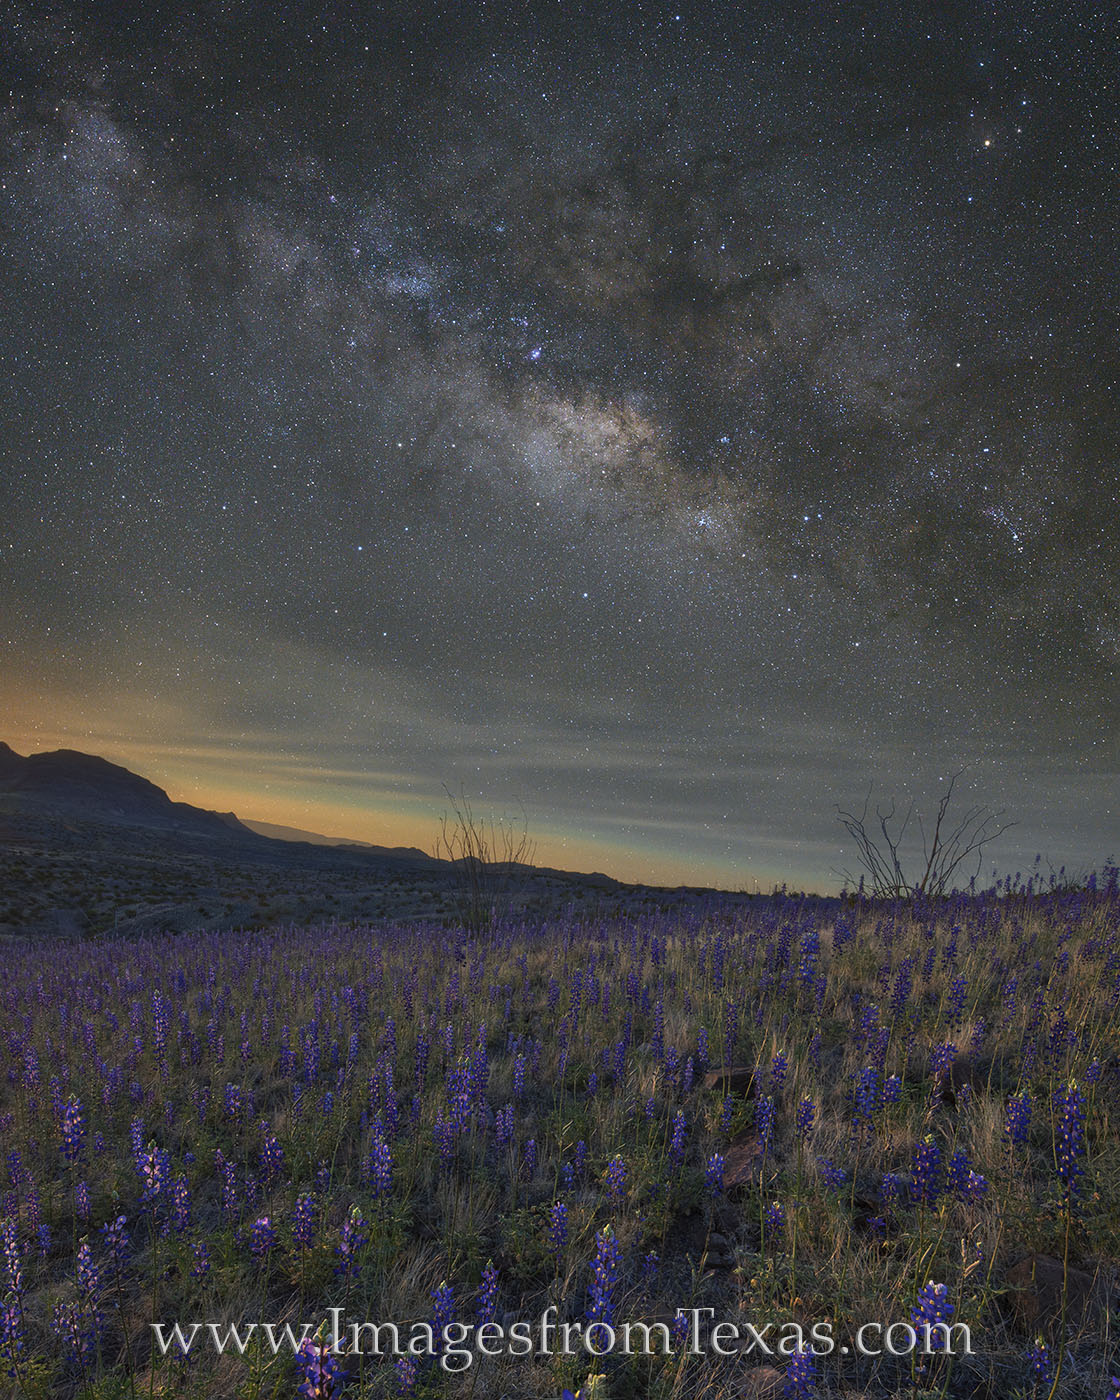 This image of the Milky Way over Big Bend National Park and a stretch of bluebonnets is a composite of two images. The first...